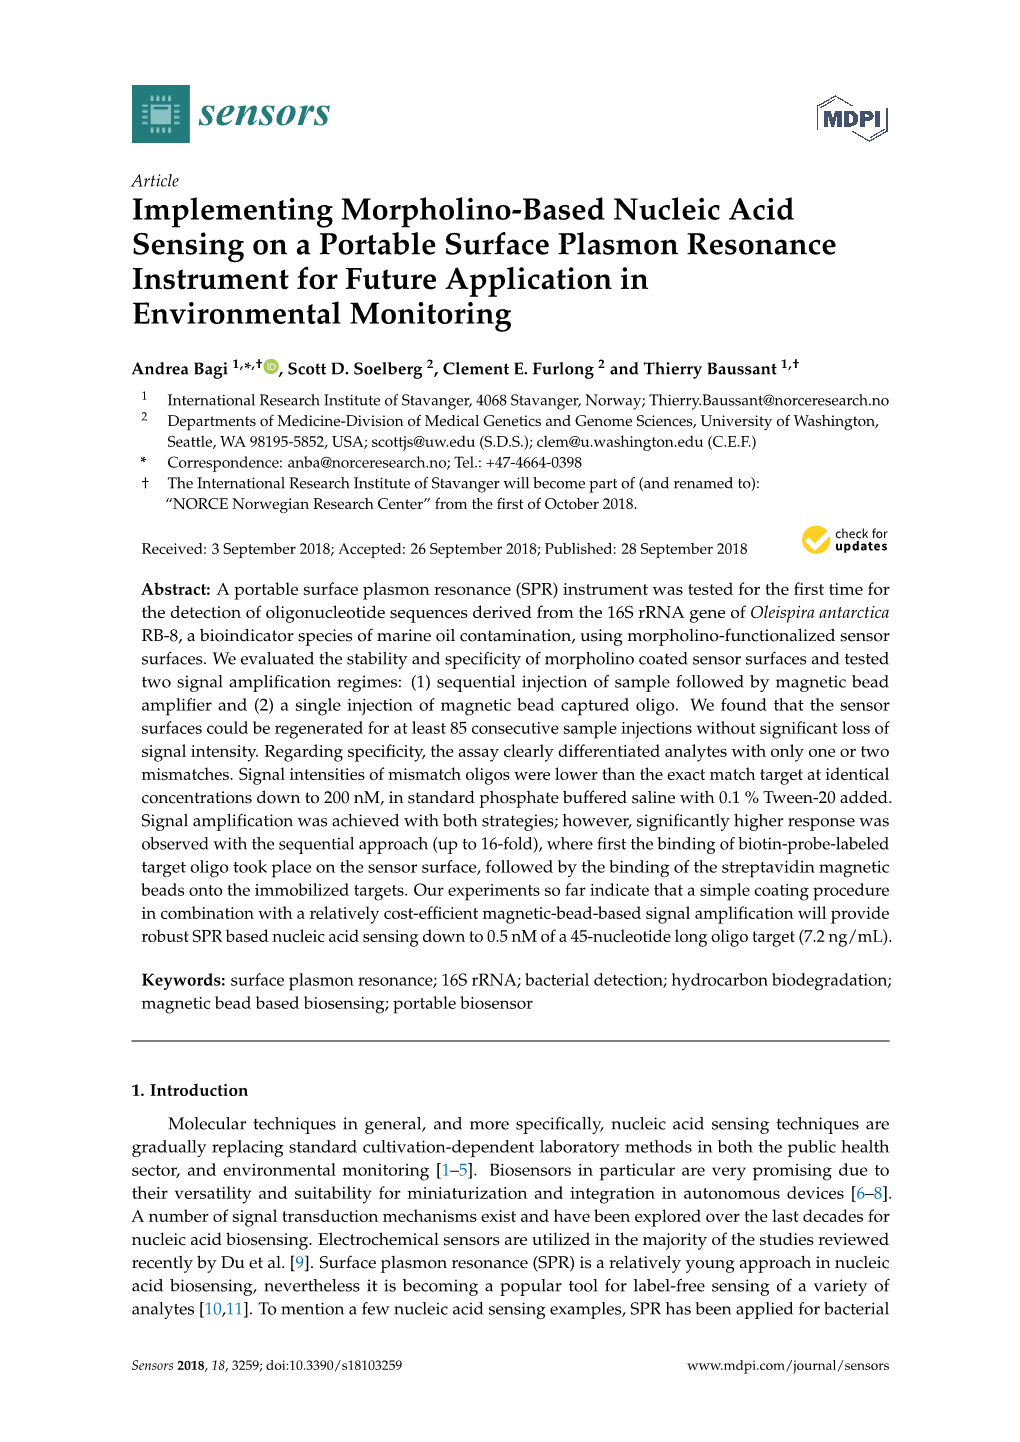 Implementing Morpholino-Based Nucleic Acid Sensing on a Portable Surface Plasmon Resonance Instrument for Future Application in Environmental Monitoring